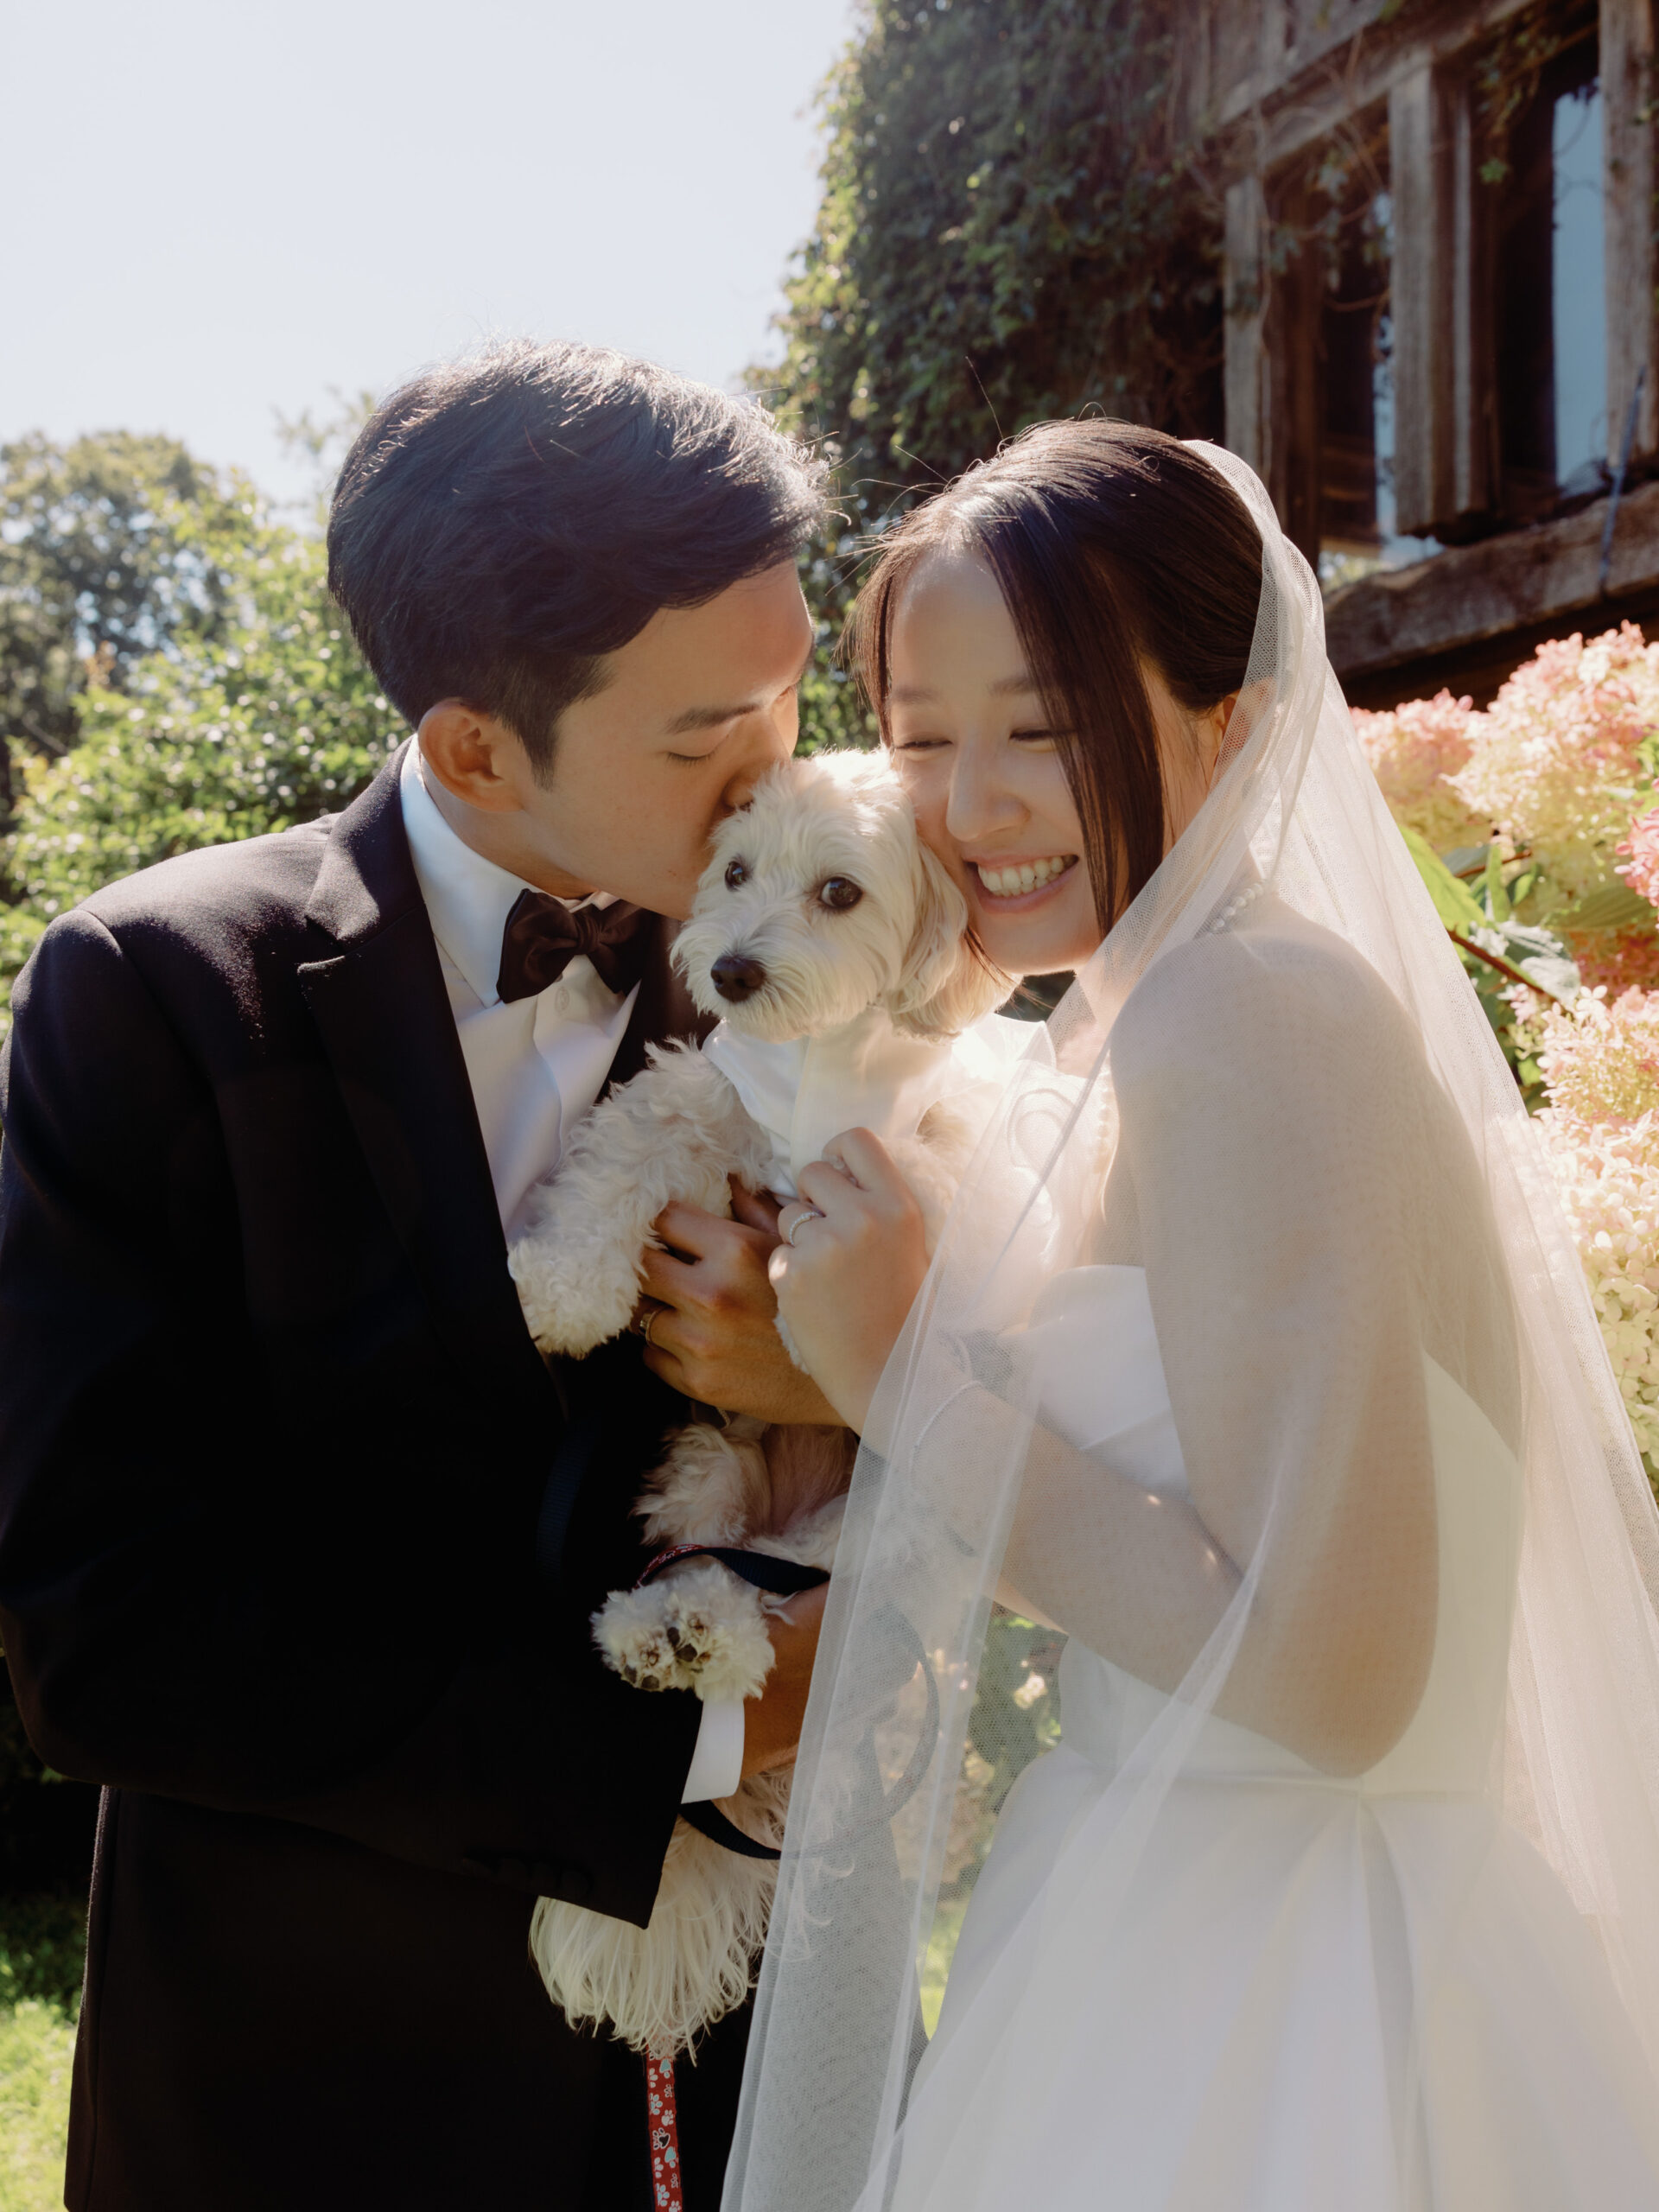 Candid image of the bride and groom with their dog. Photo by Jenny Fu Studio